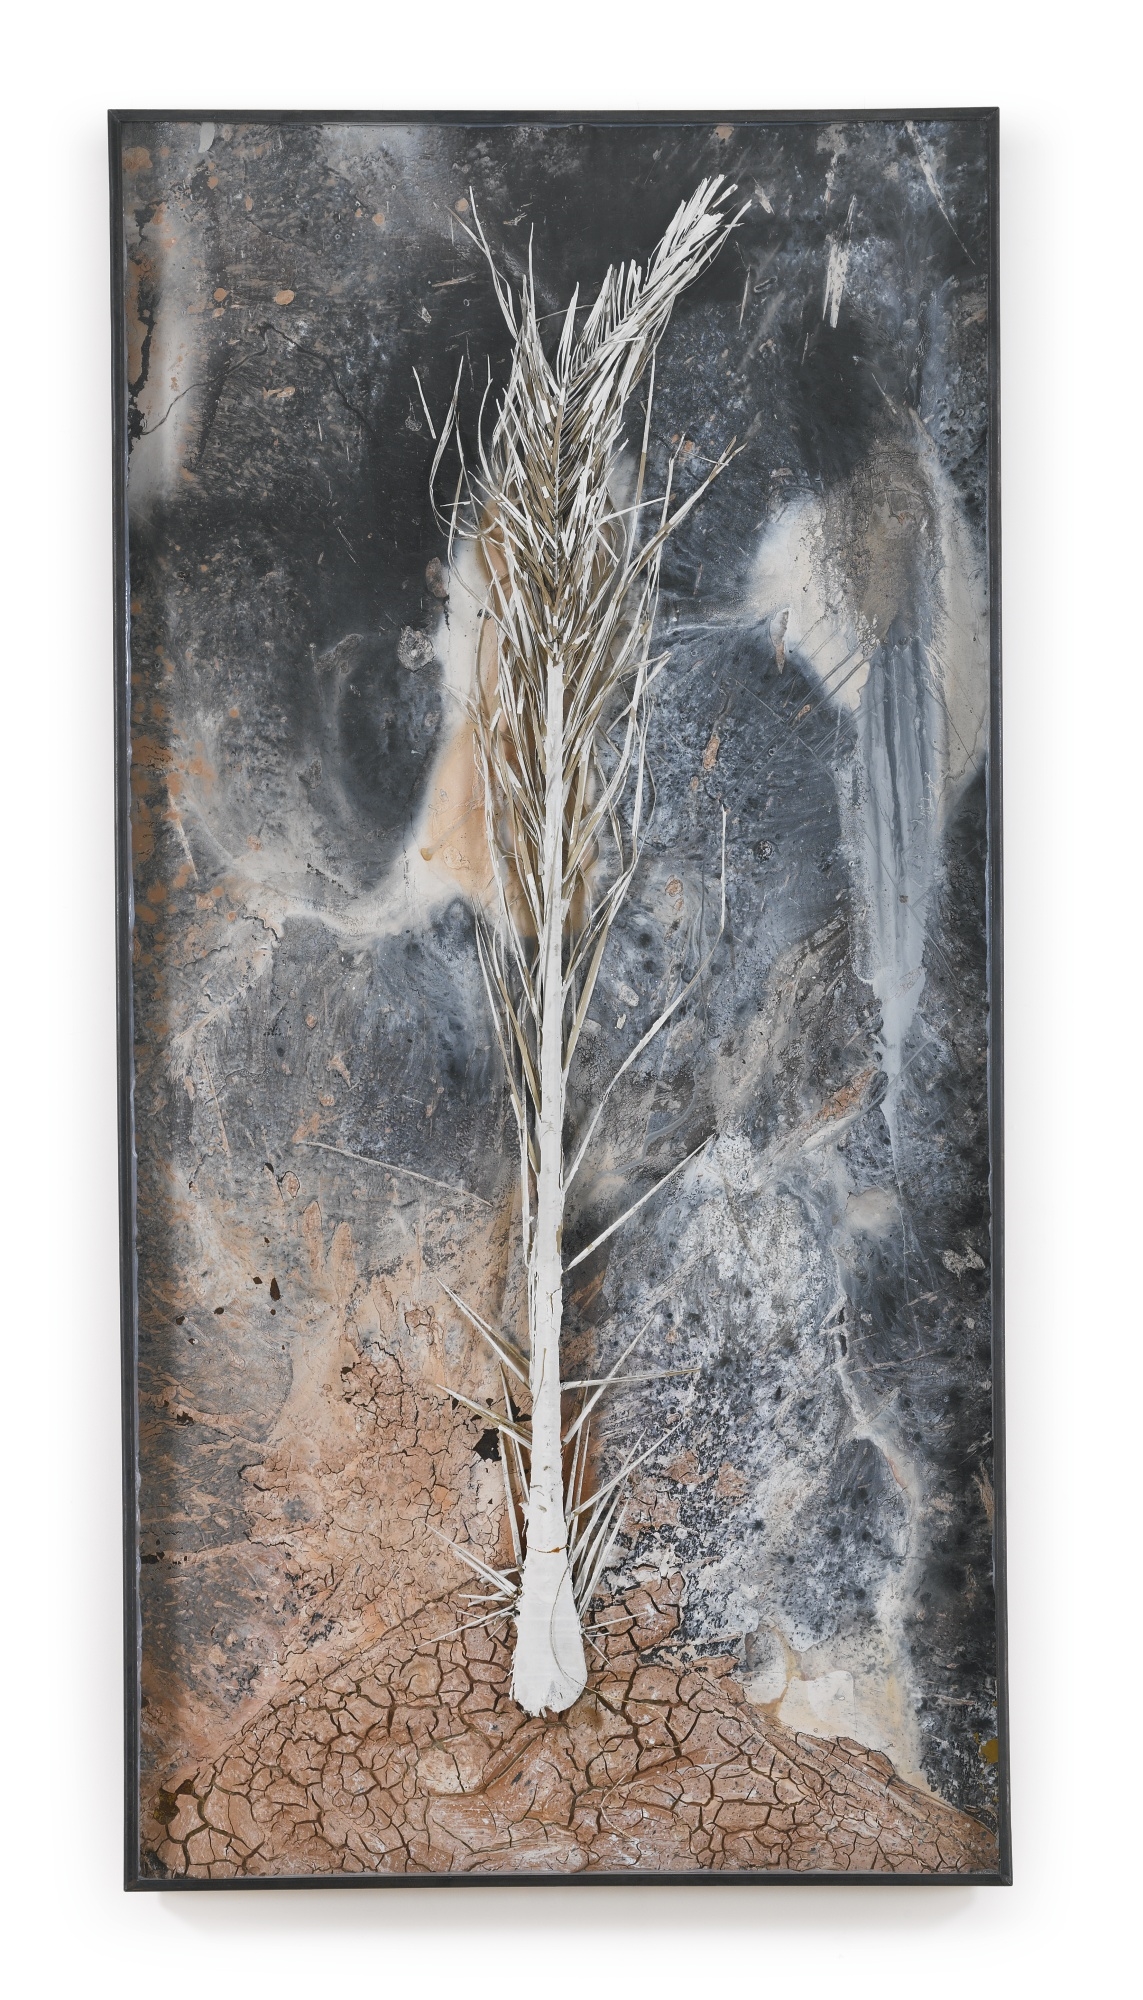 THE PALM by Anselm Kiefer, 2006